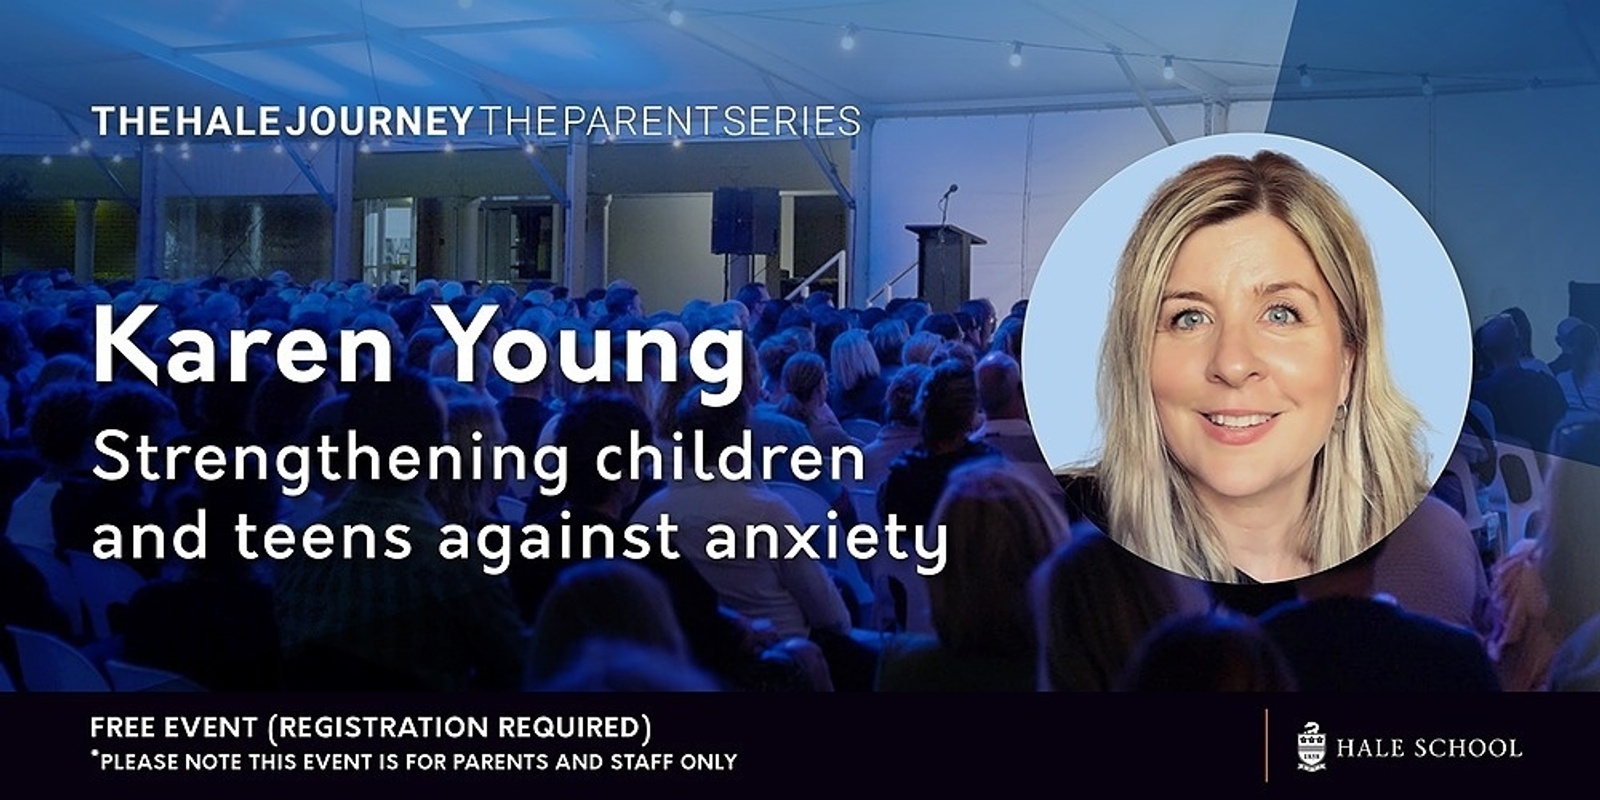 Karen Young - Strengthening children and teens against anxiety